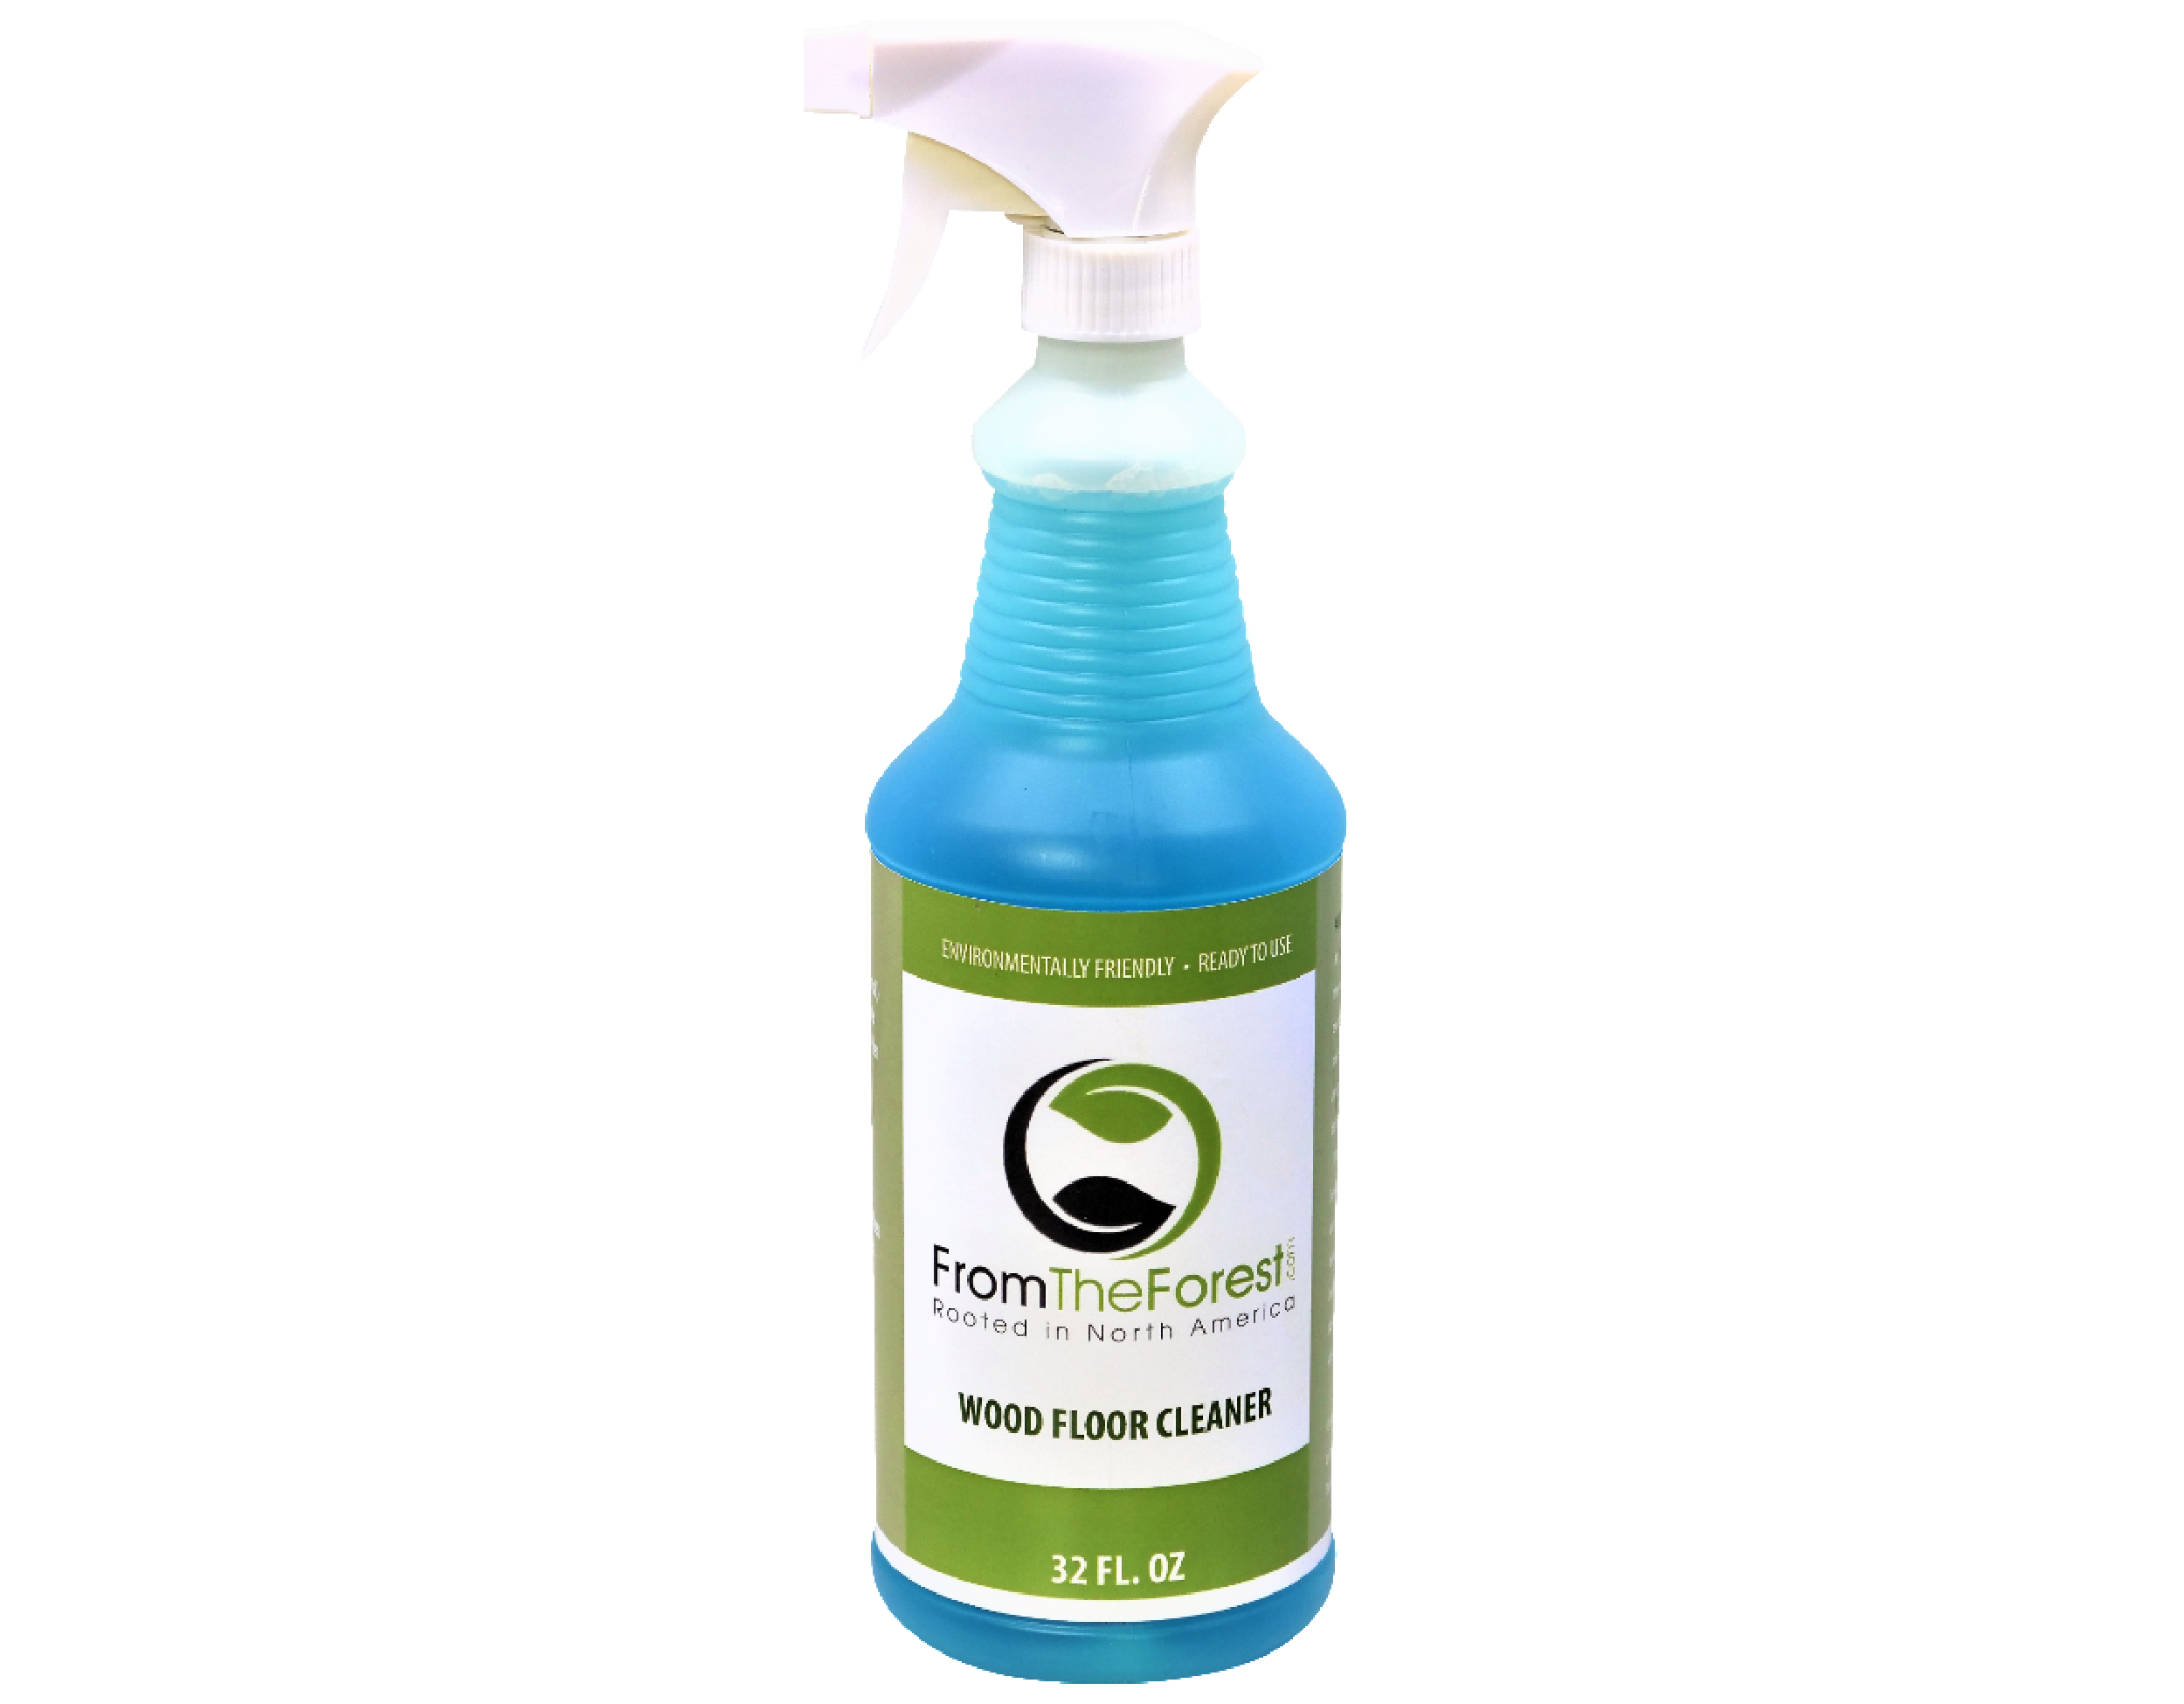 Hardwood Flooring Cleaner From The Forest, Floor Cleaner For Hardwood Floors